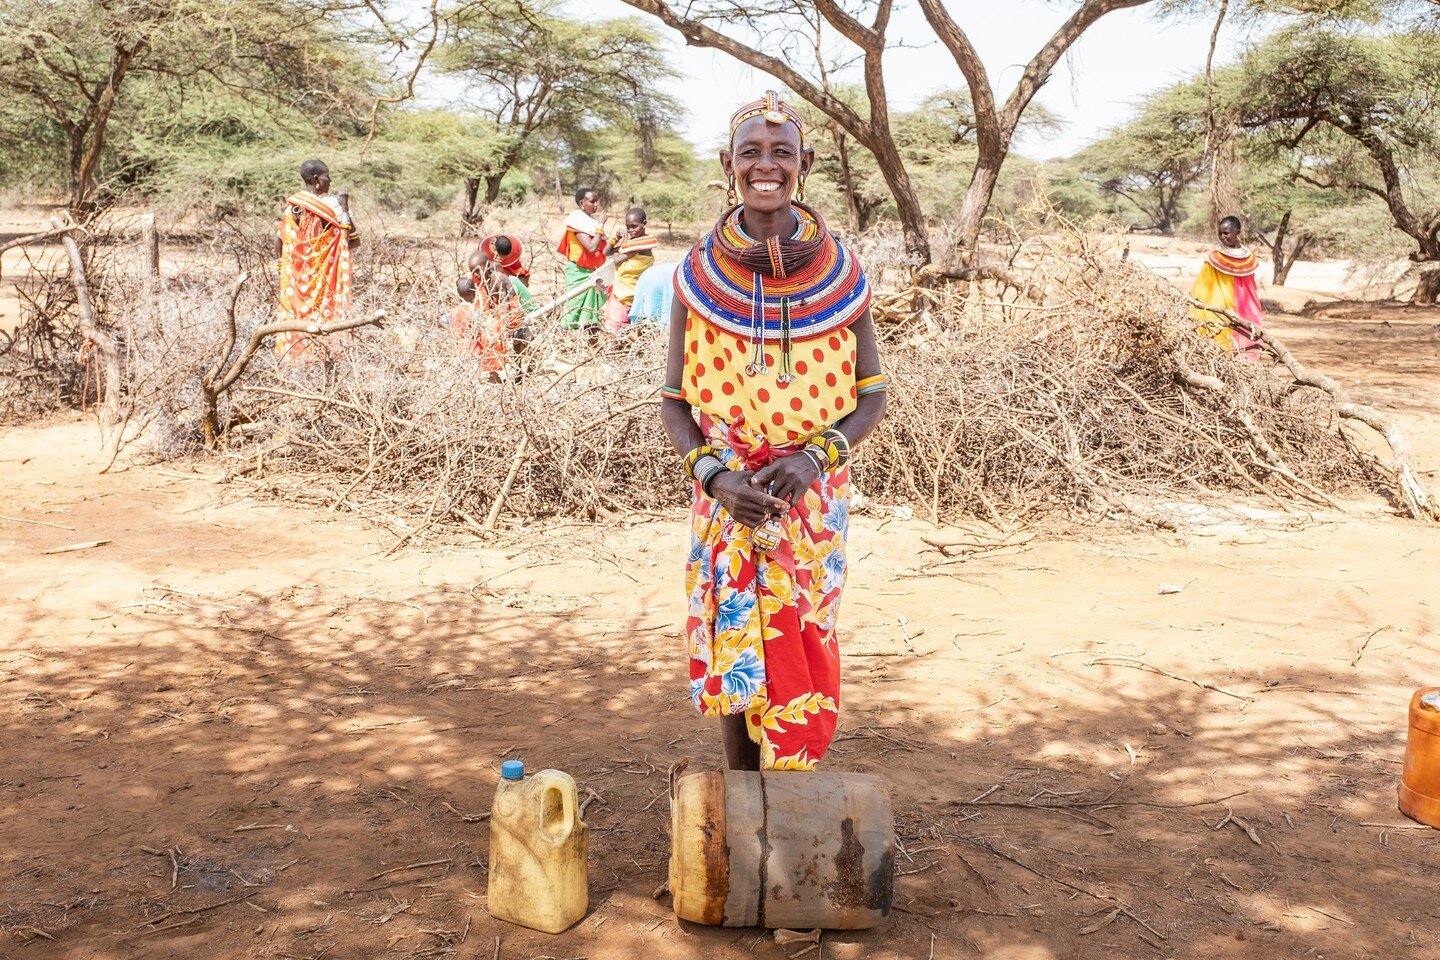 At The Samburu Project, our mission starts with improving access to clean water, but continues by building on that foundation to improve health, expand education, empower women, and encourage growth. Access to clean water is just the beginning. #more